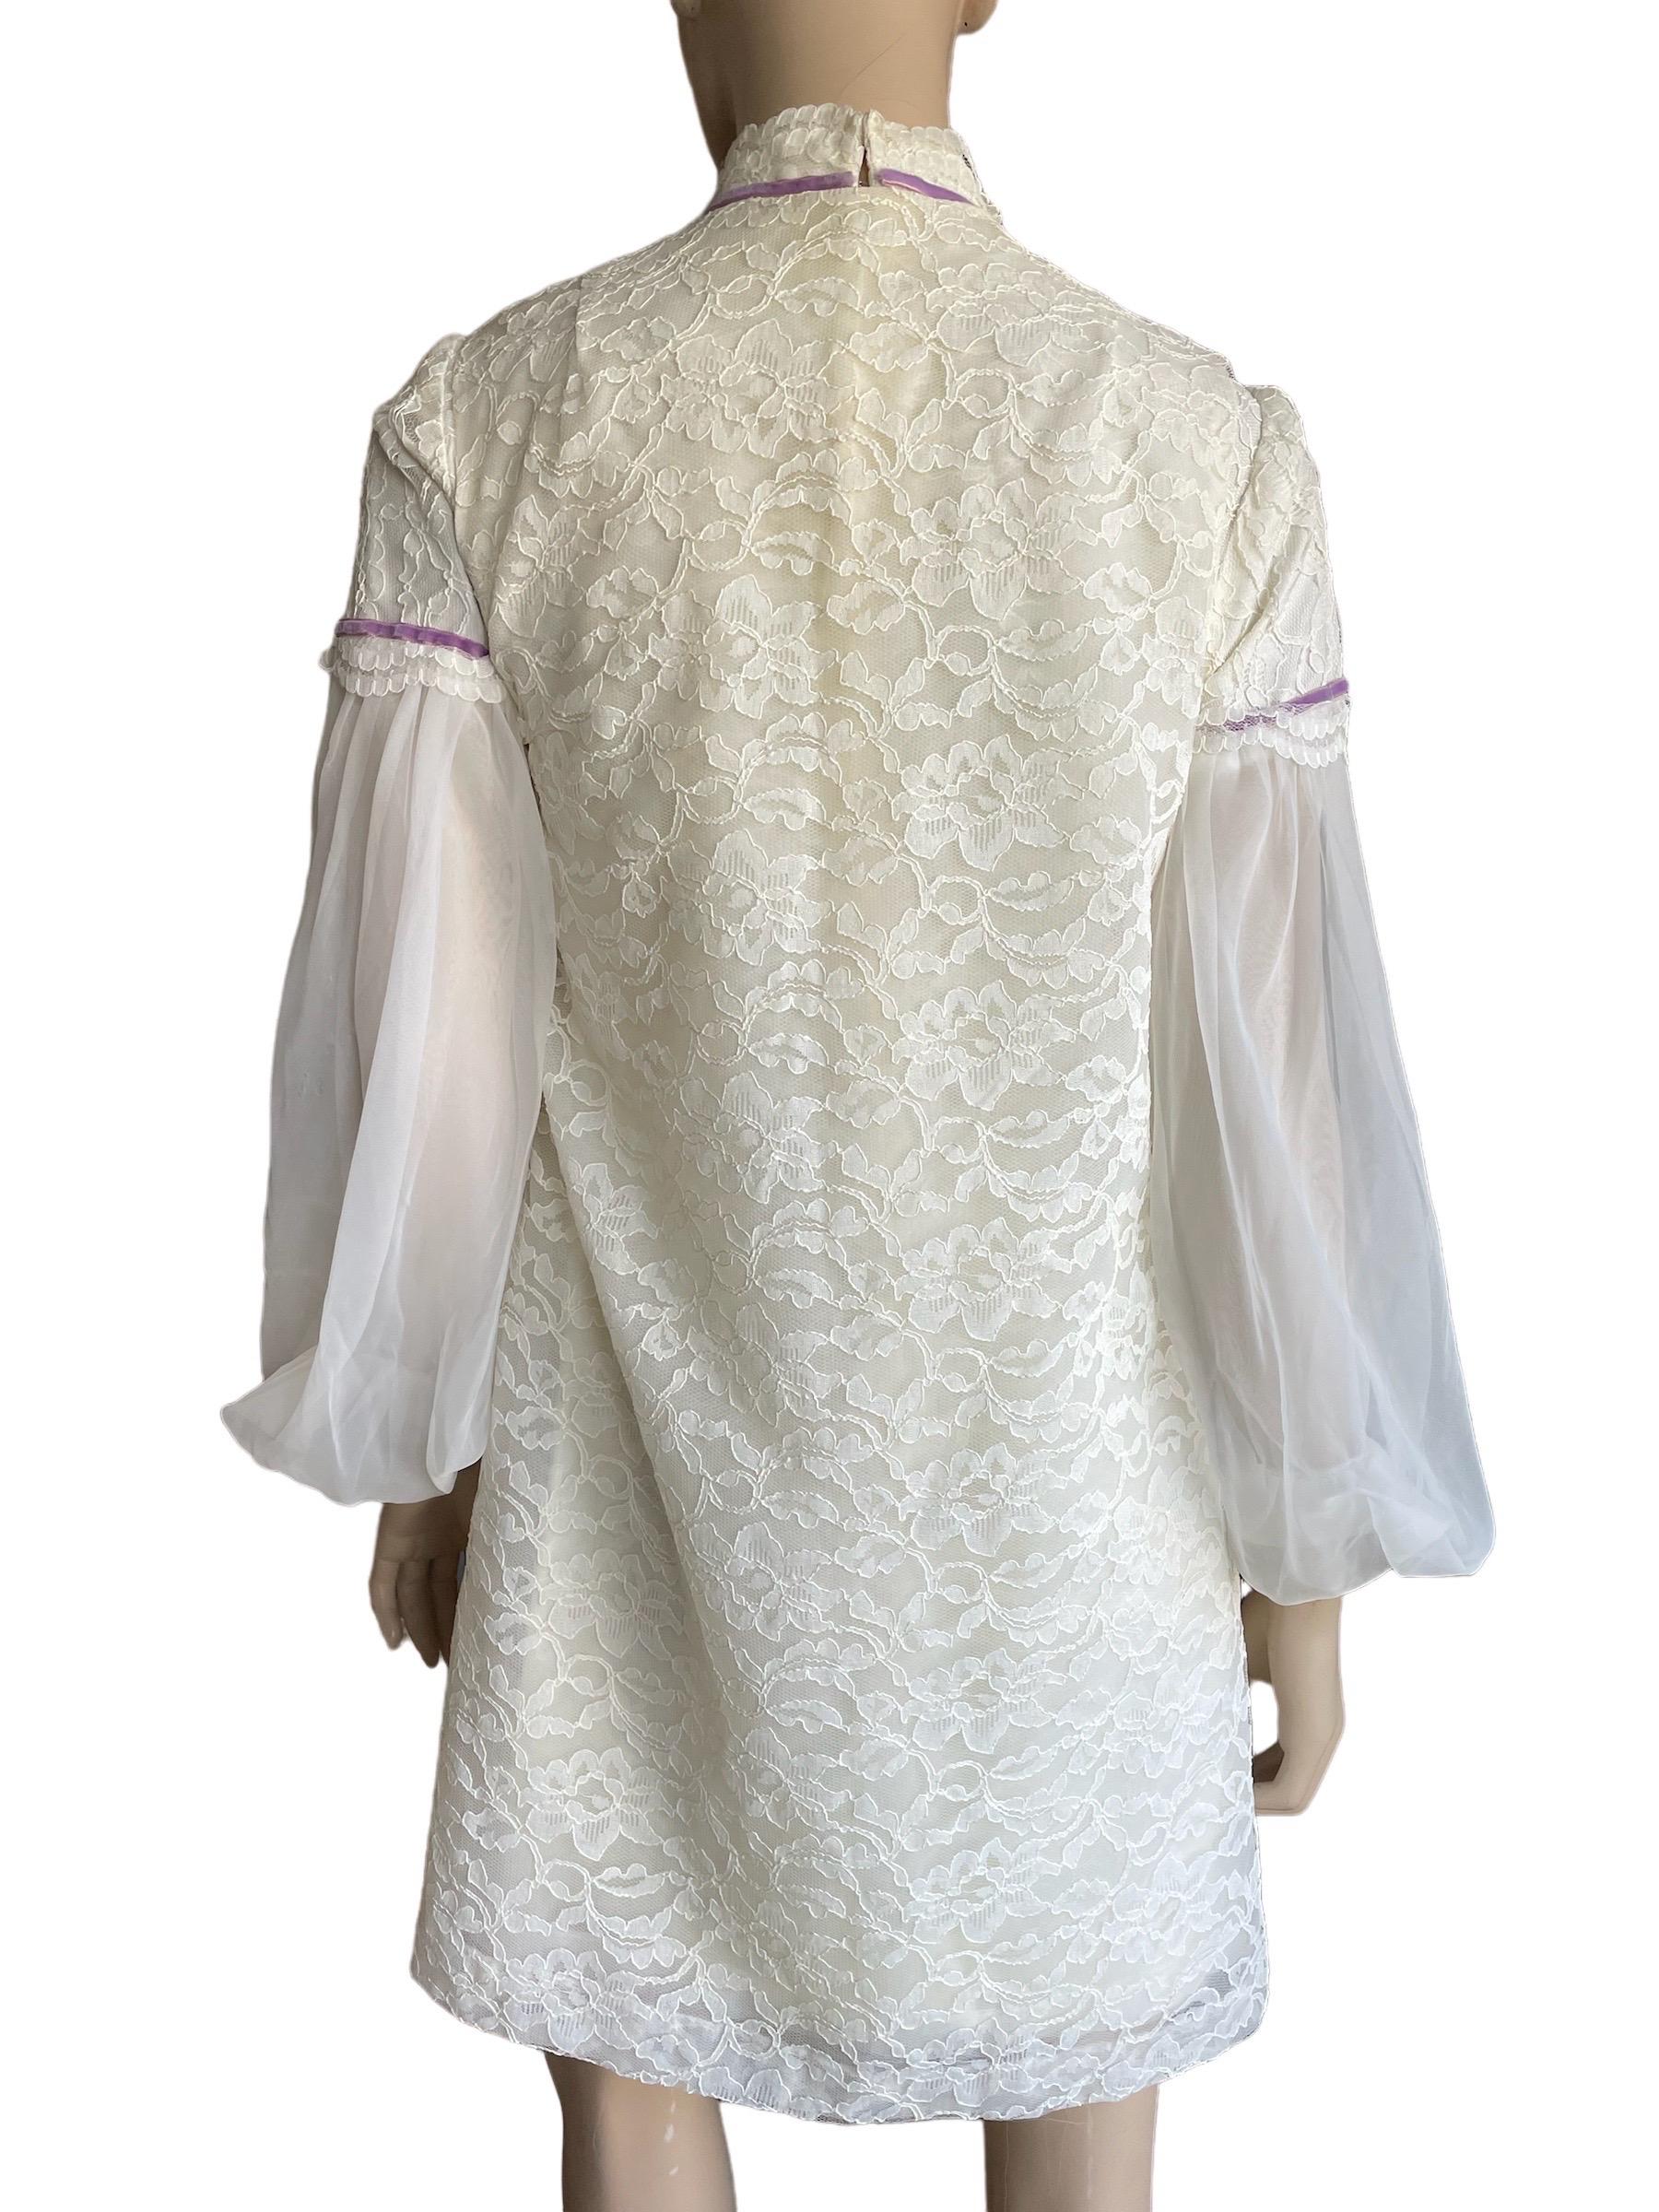 1960s Cream Lace Mini Dress with Bishop Sleeves and Vest  For Sale 1